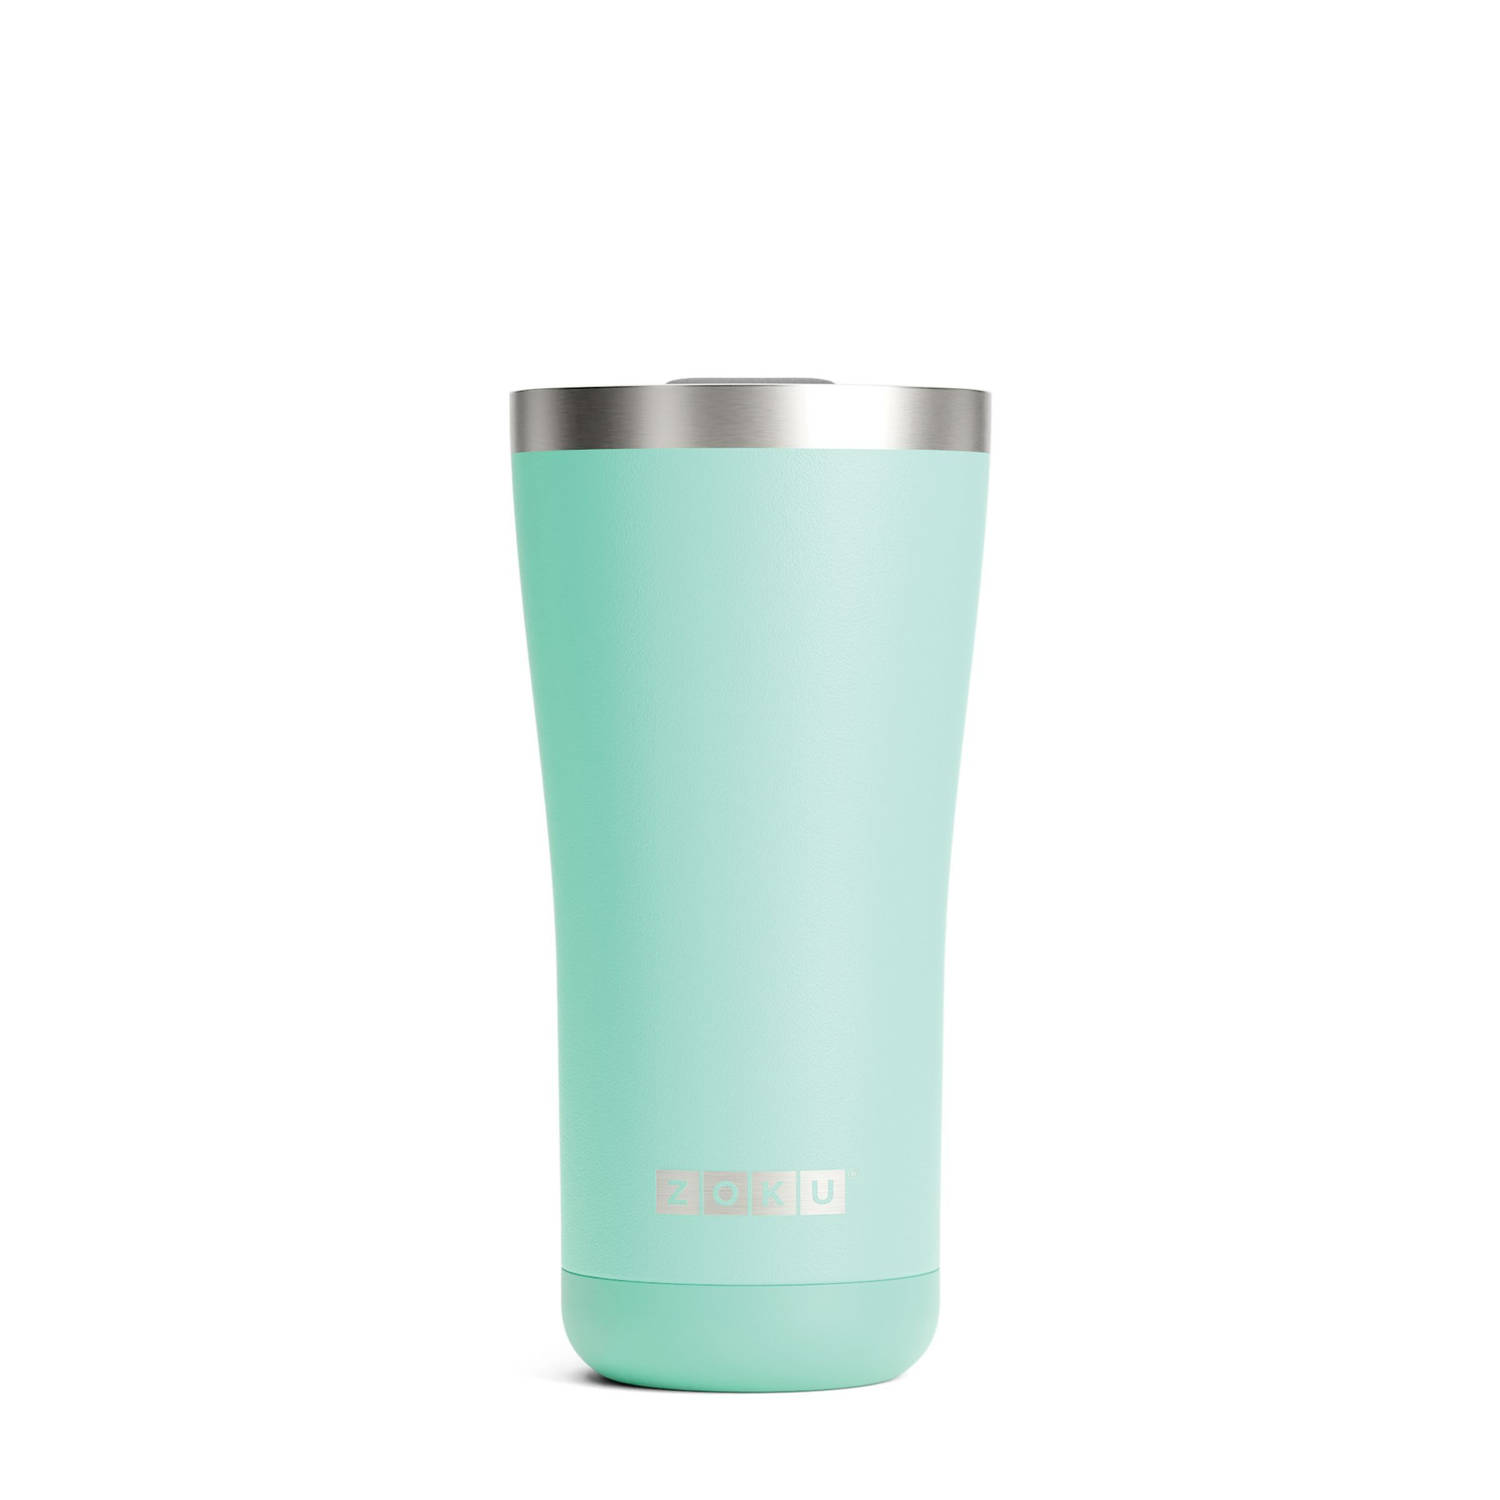 Thermosbeker Rvs, 550 Ml, Turquoise, 3-in-1 Zoku